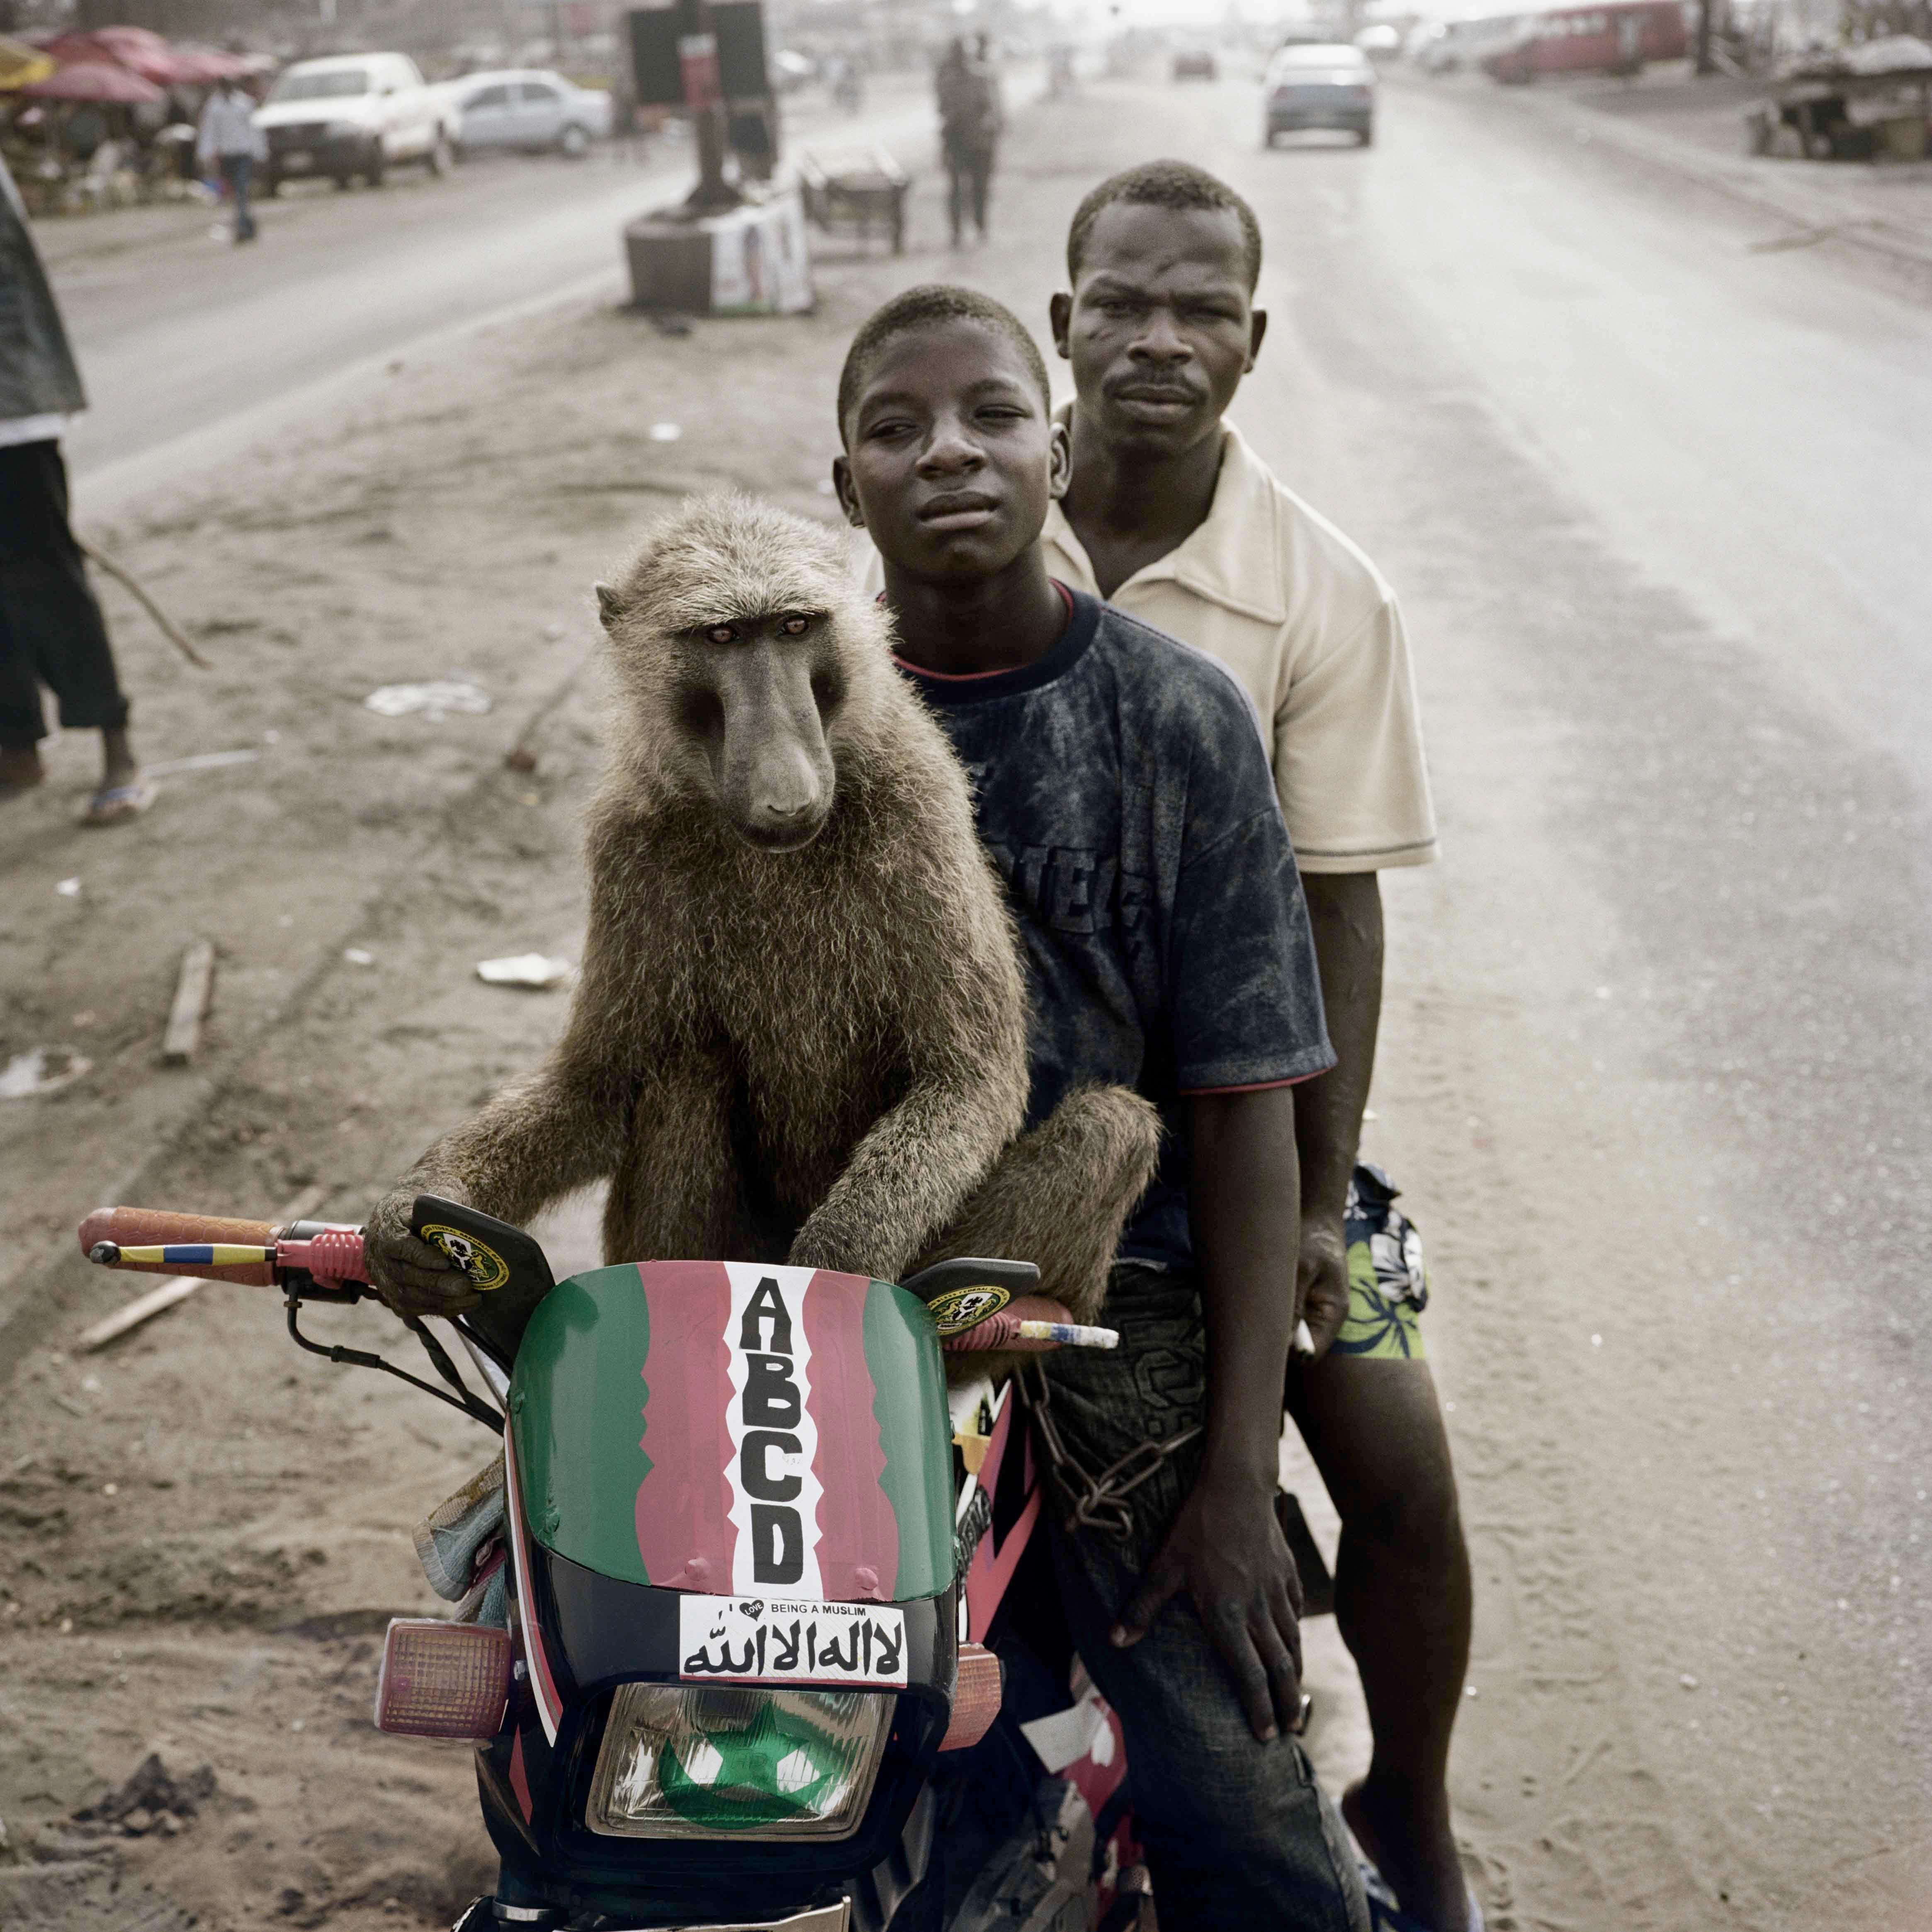 Emeka, Motorcyclist and Abdullahi Ahmadu, Asaba, Nigeria, 2007 - Pieter Hugo
Signed on reverse
Digital c-type print
39 1/4 x 39 1/4 inches
From an edition of 9 + 2 APs

Pieter Hugo (born 1976) is a South African artist who, through his large format